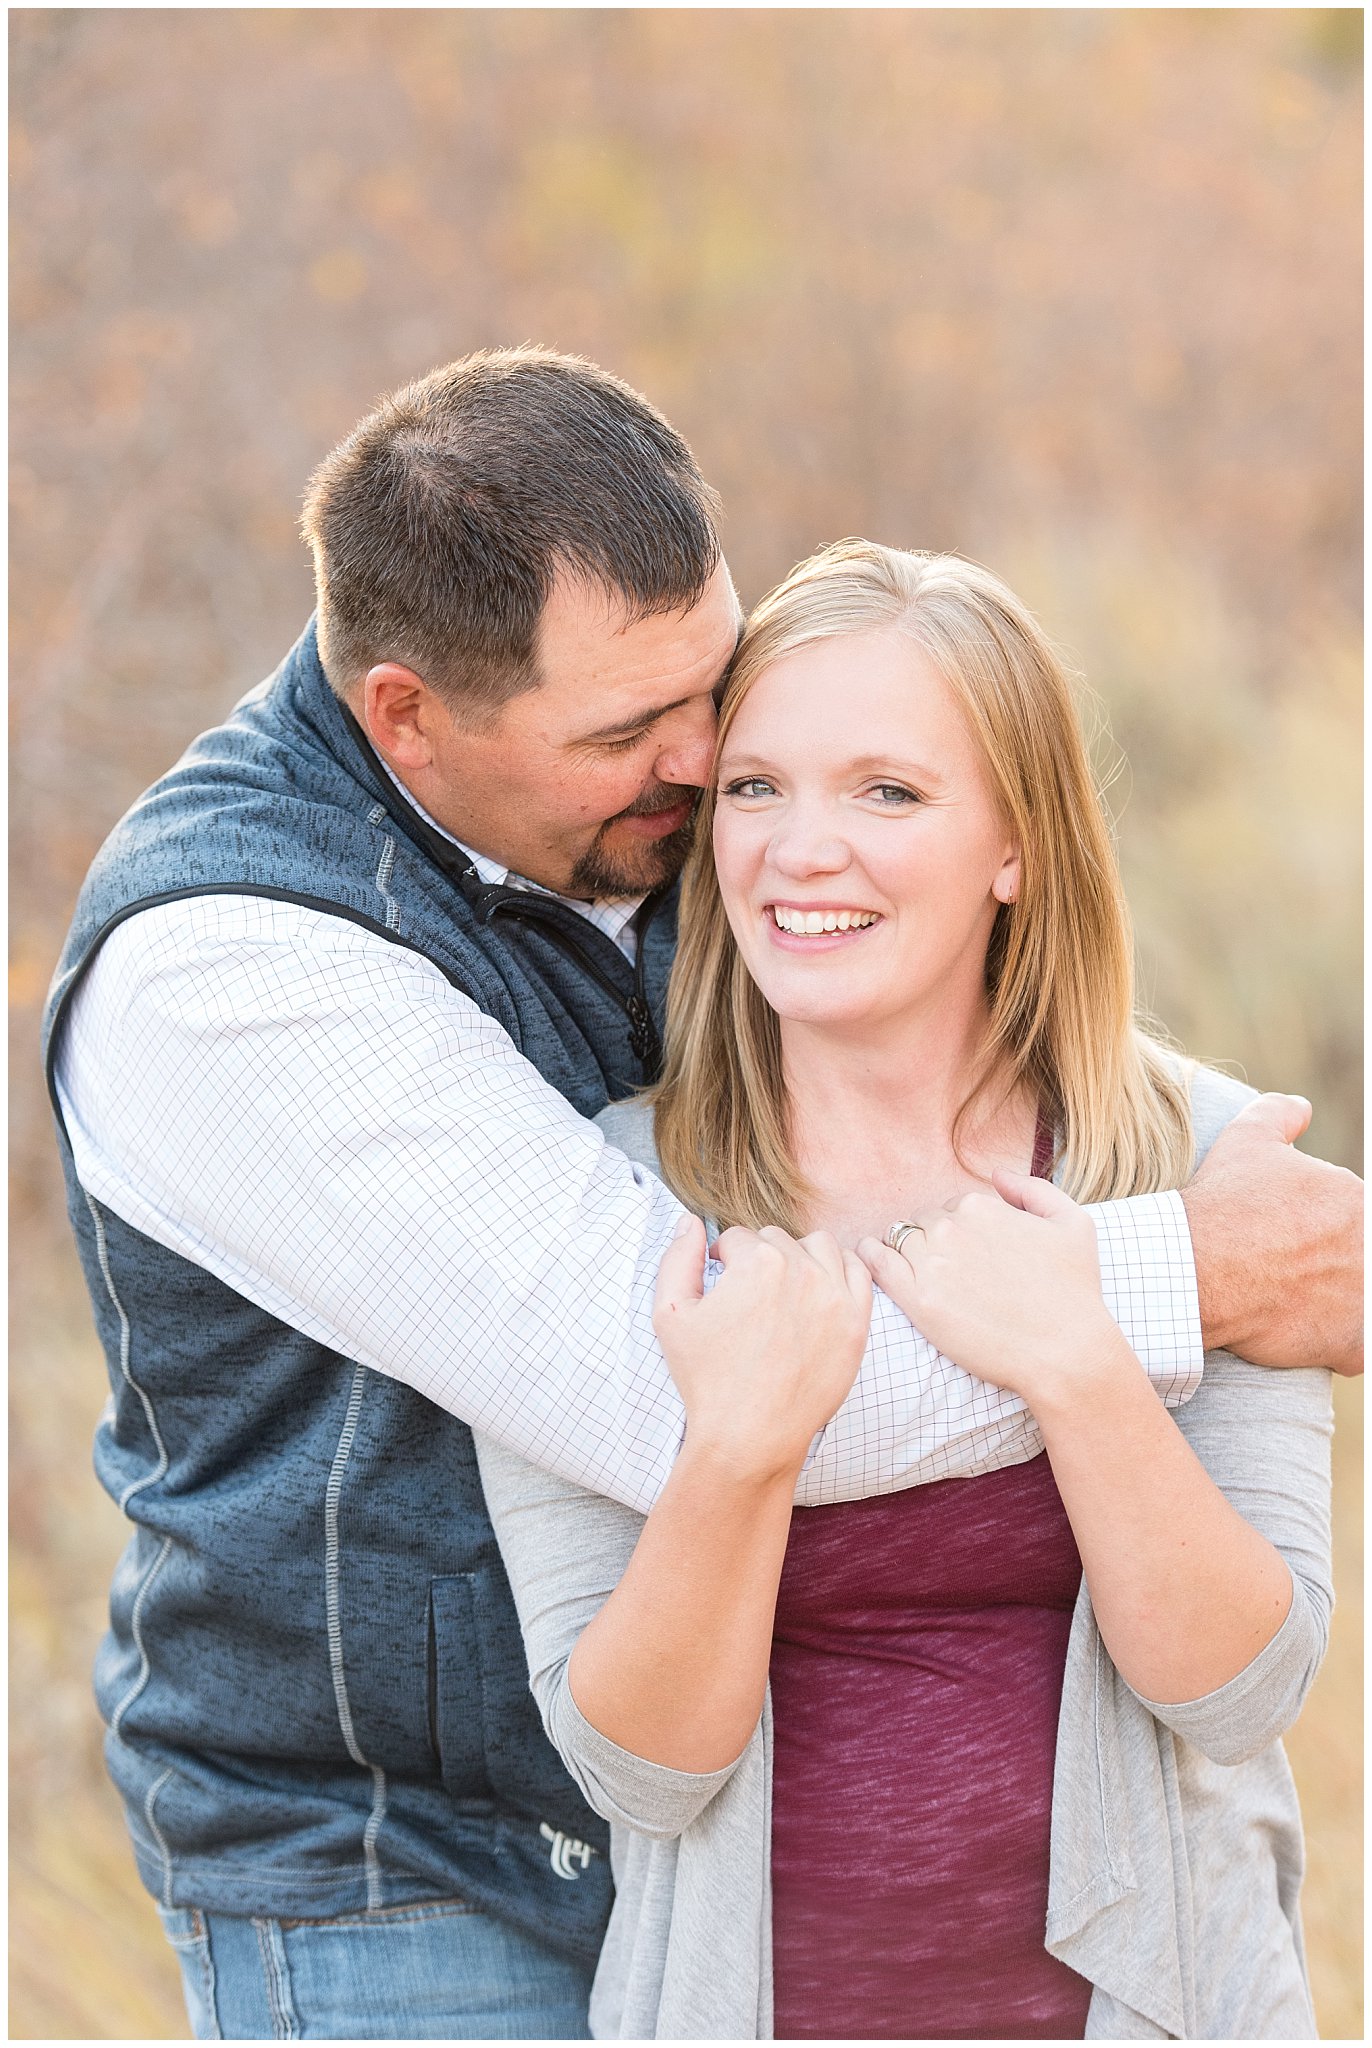 Candid couples portrait in the fall leaves | Fall family photo session at Snowbasin | Snowbasin Resort | Jessie and Dallin Photography